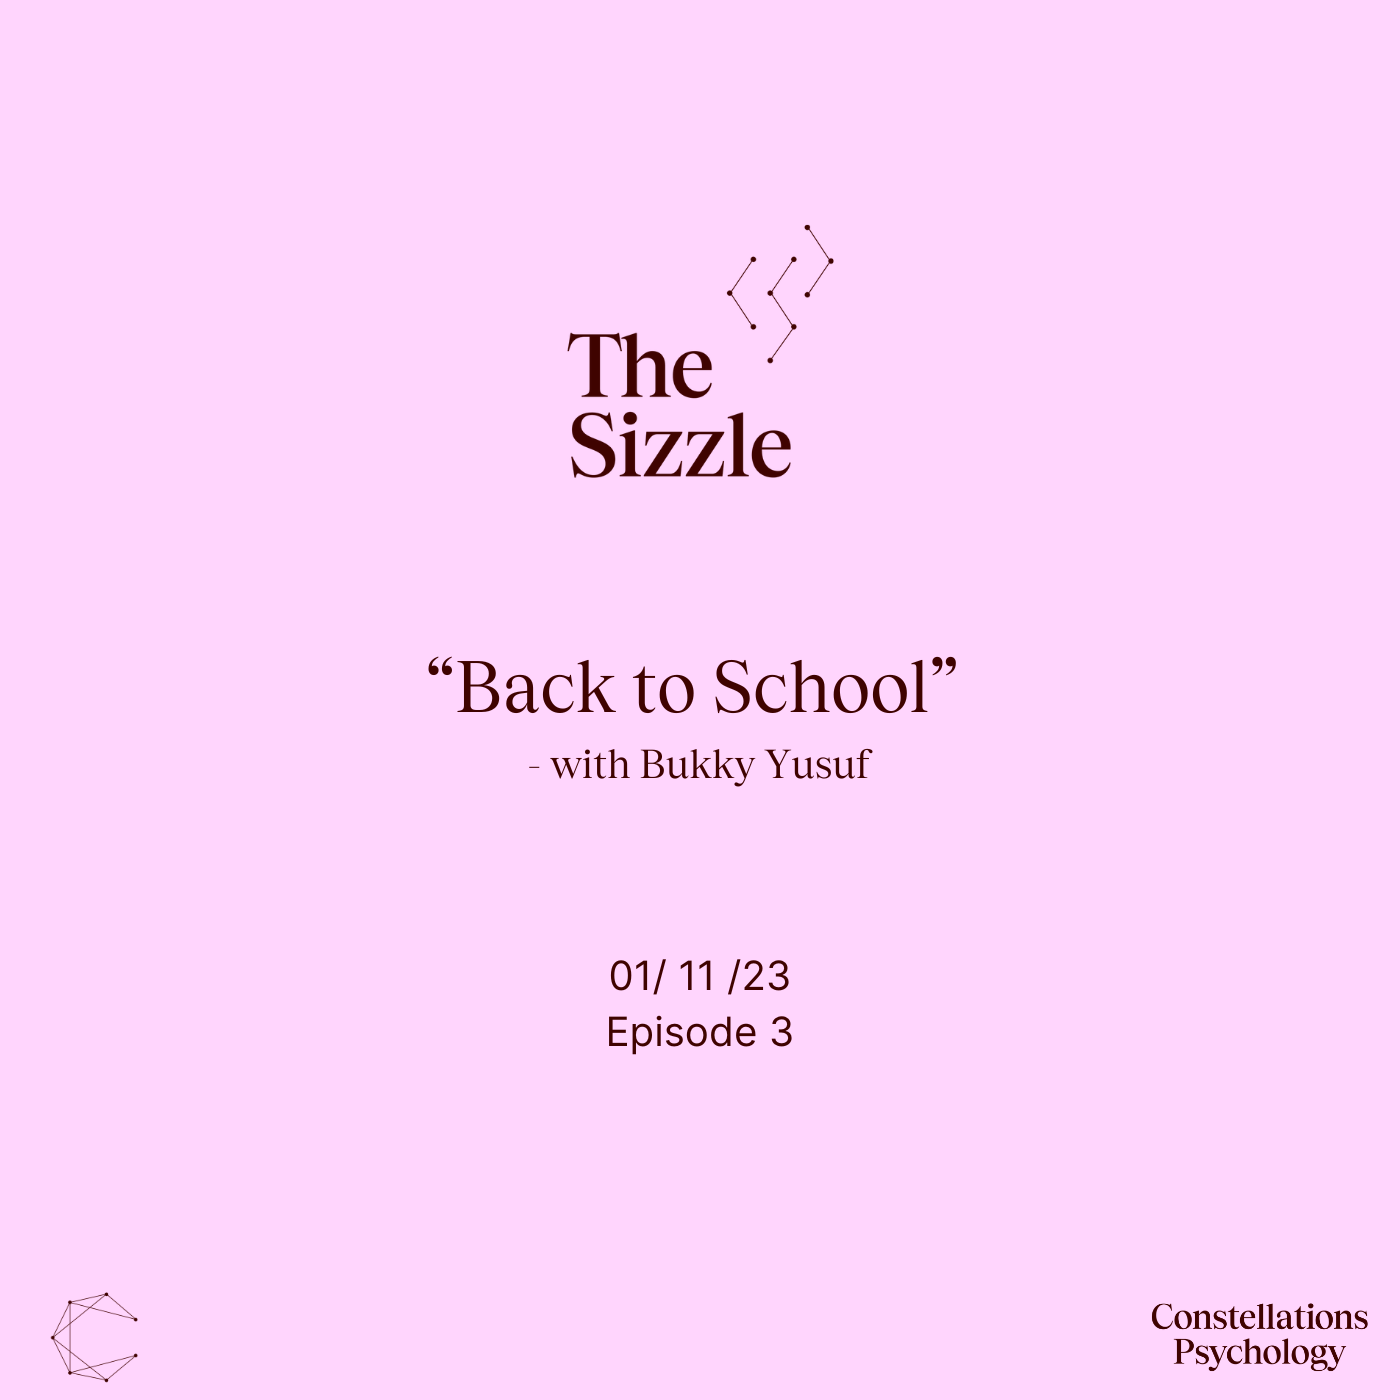 BACK TO SCHOOL with Bukky Yusuf [Episode 3]